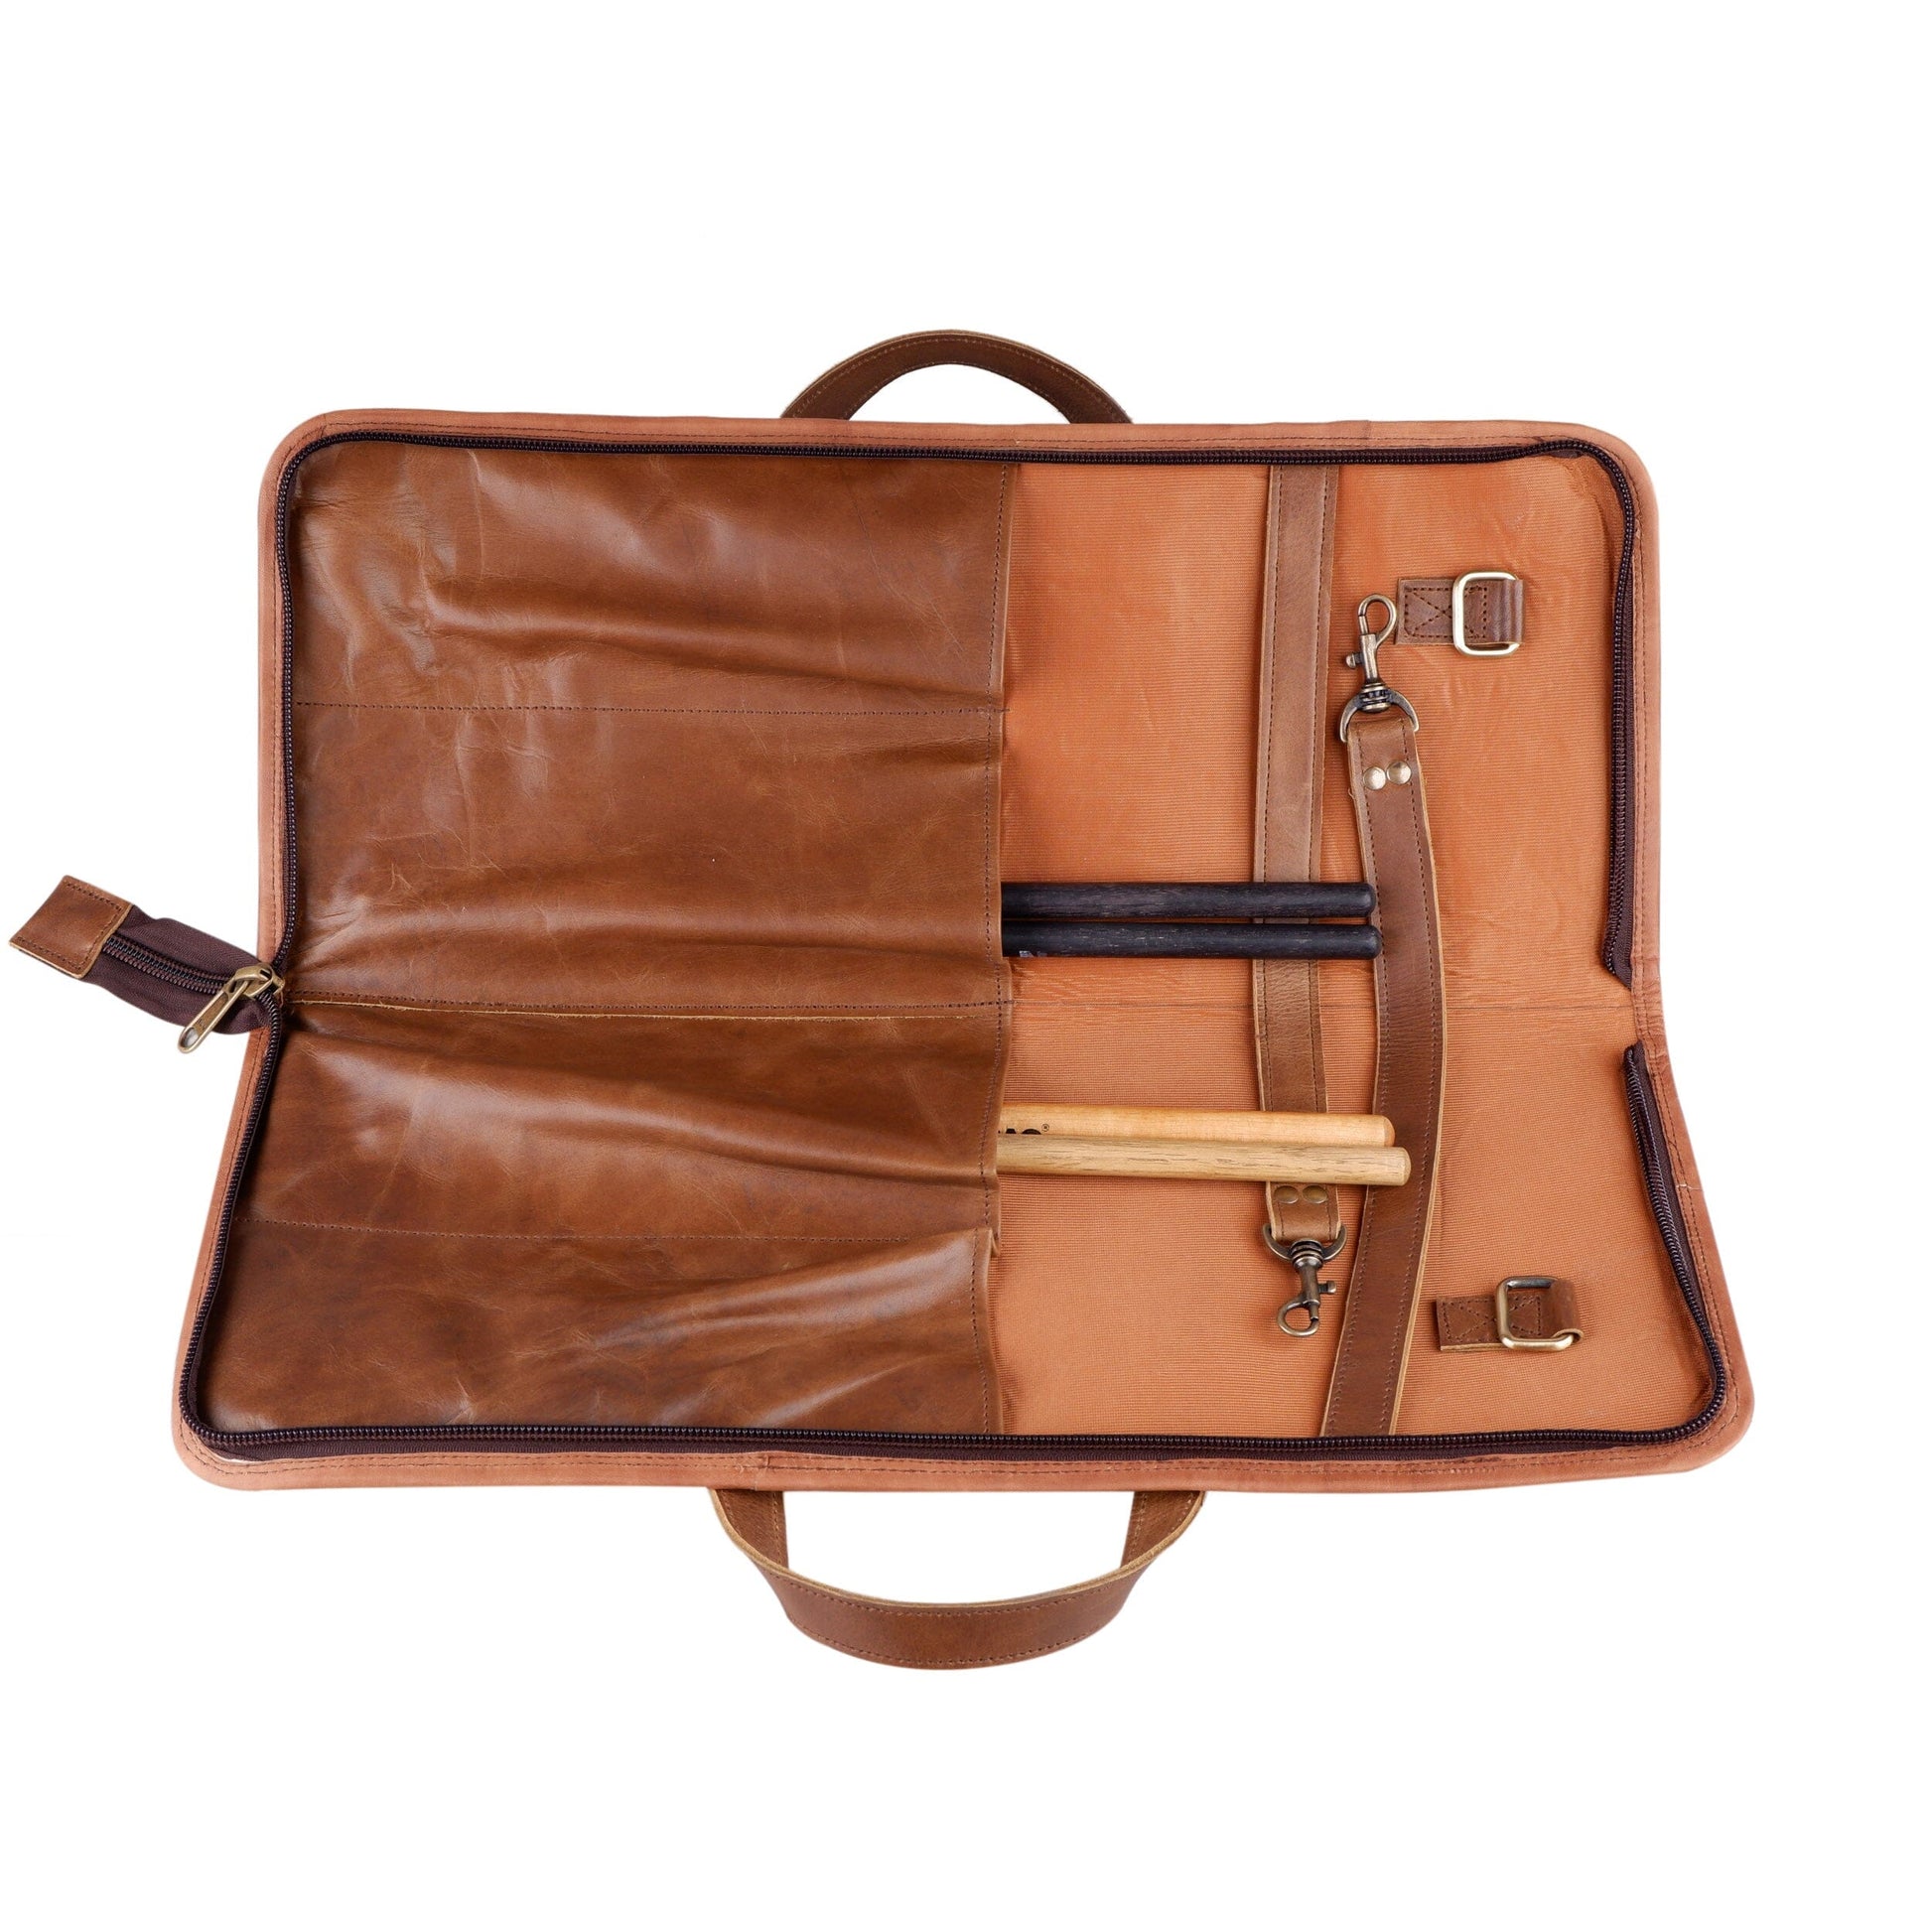 Buffalo Leather Drumsticks Bag - The Tool Store